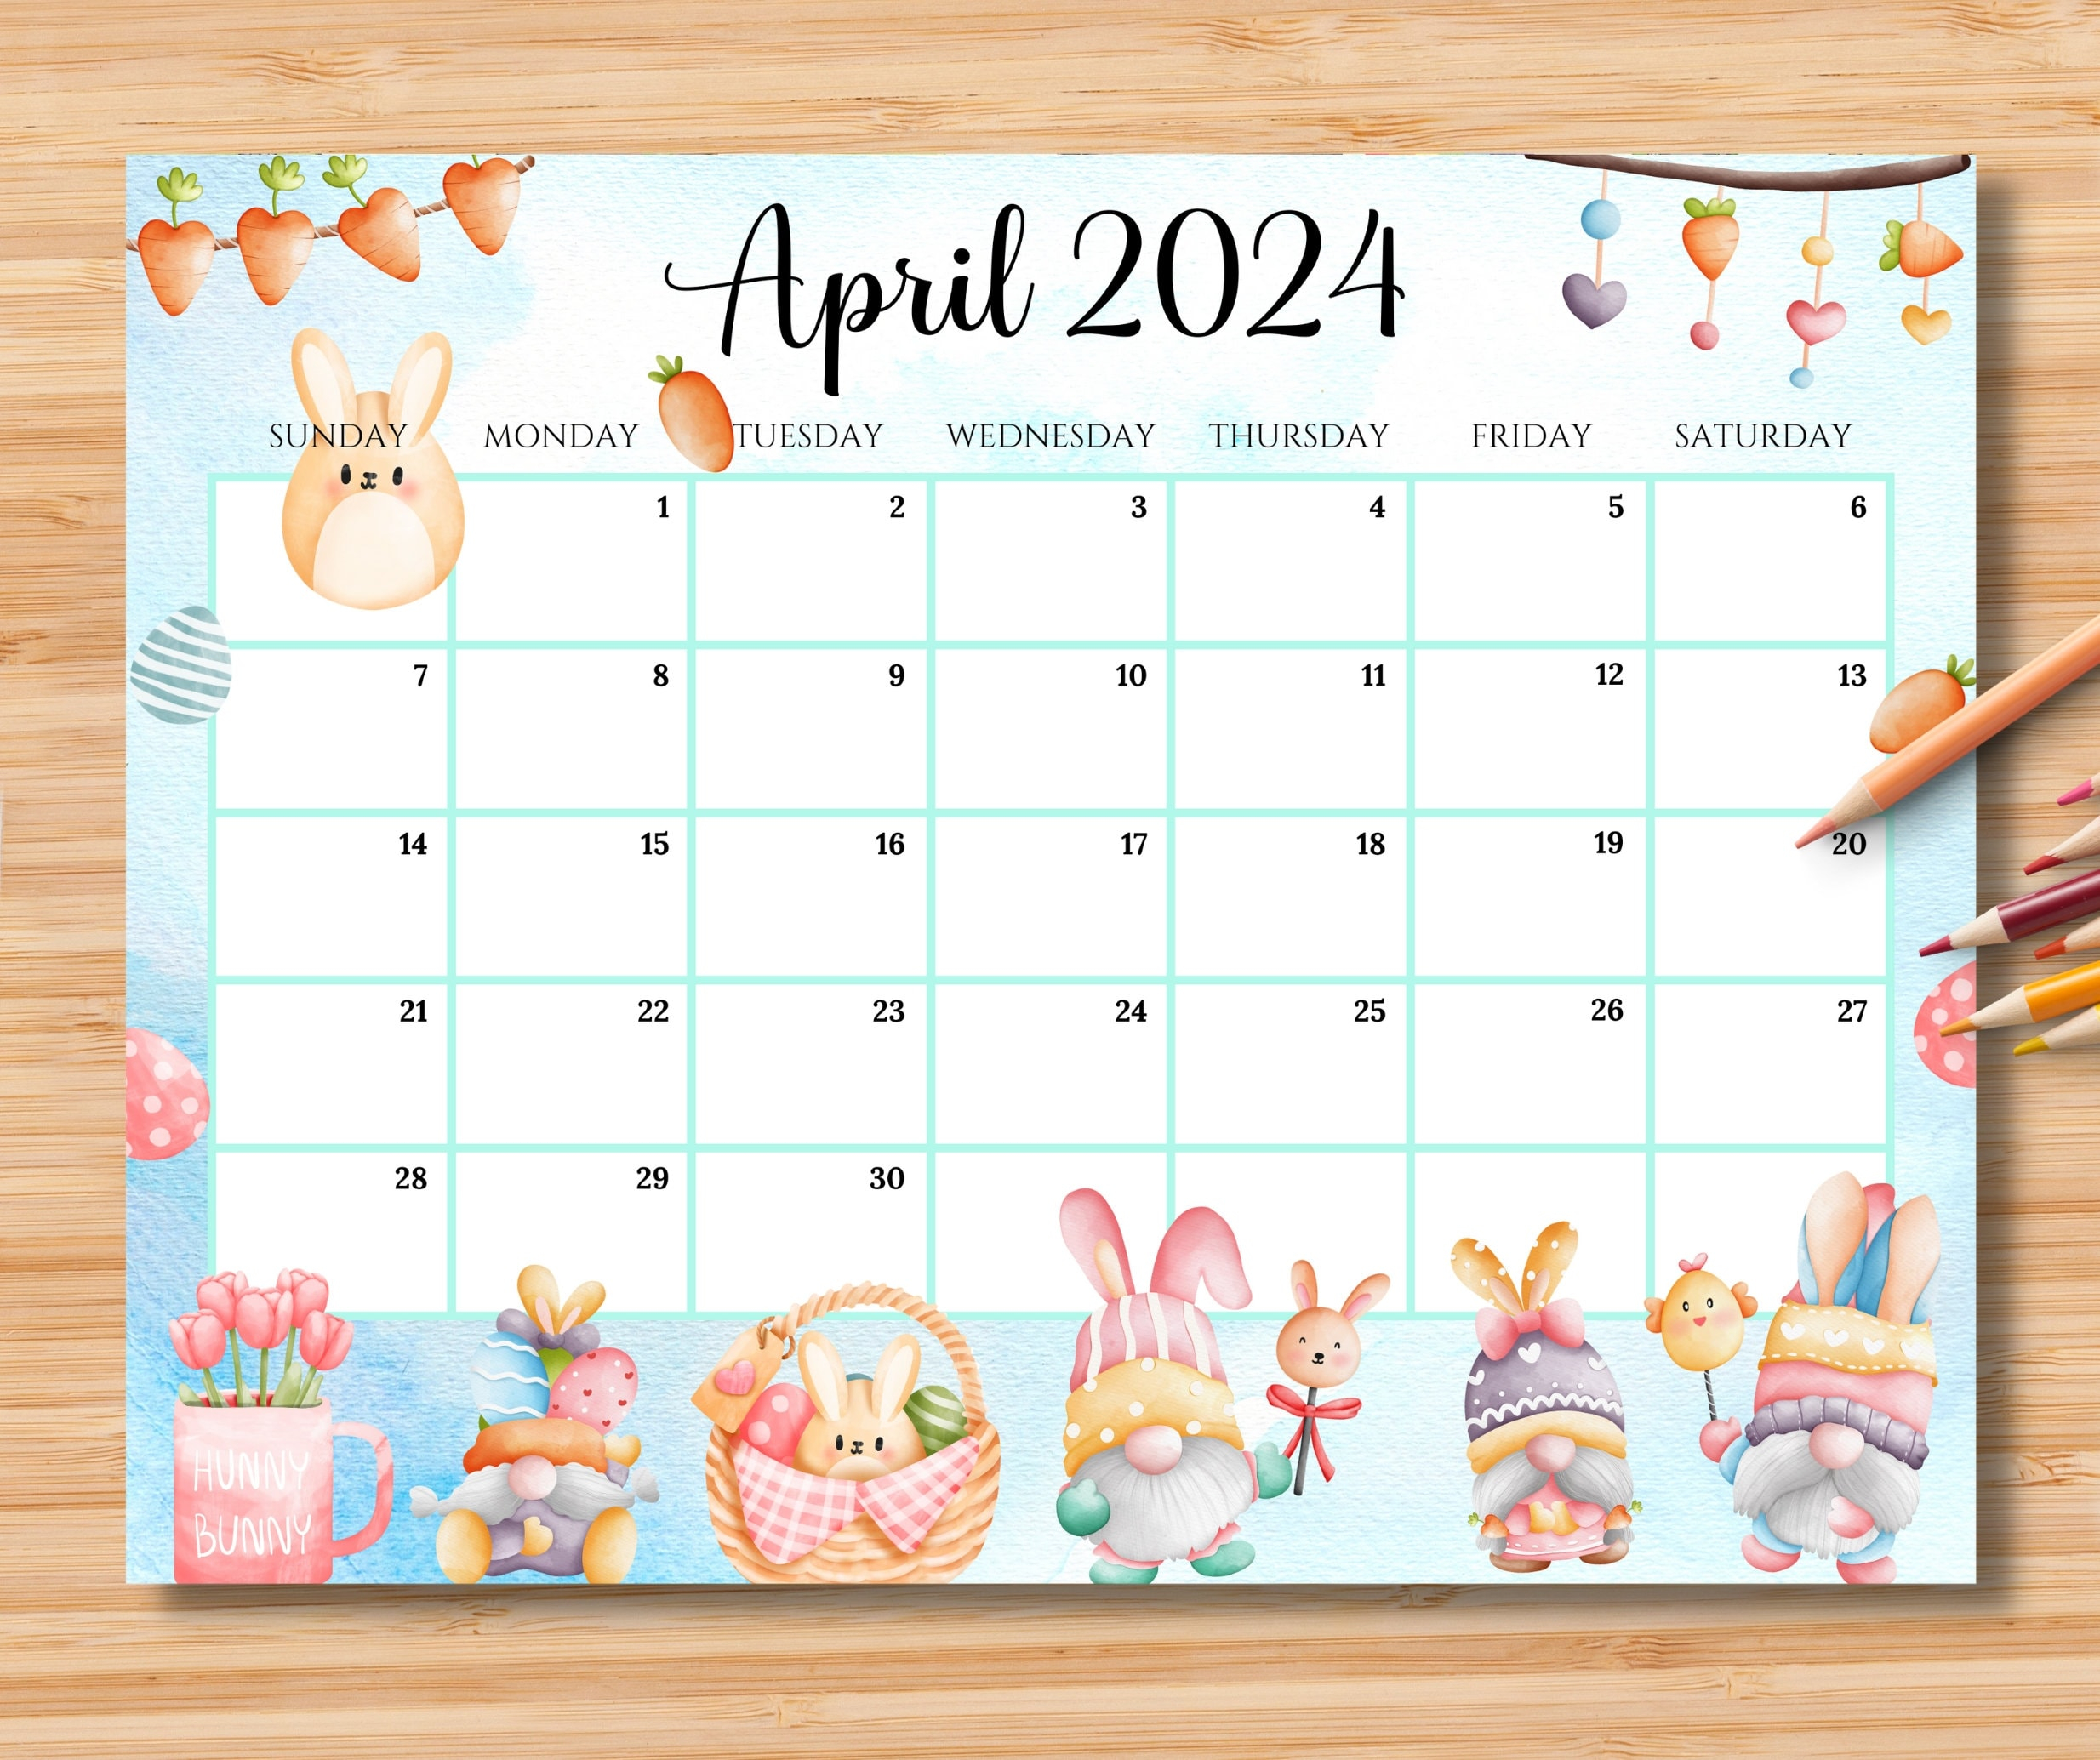 Editable April 2024 Calendar, Happy Easter Day With Cute Gnomes inside April Editable Calendar 2024